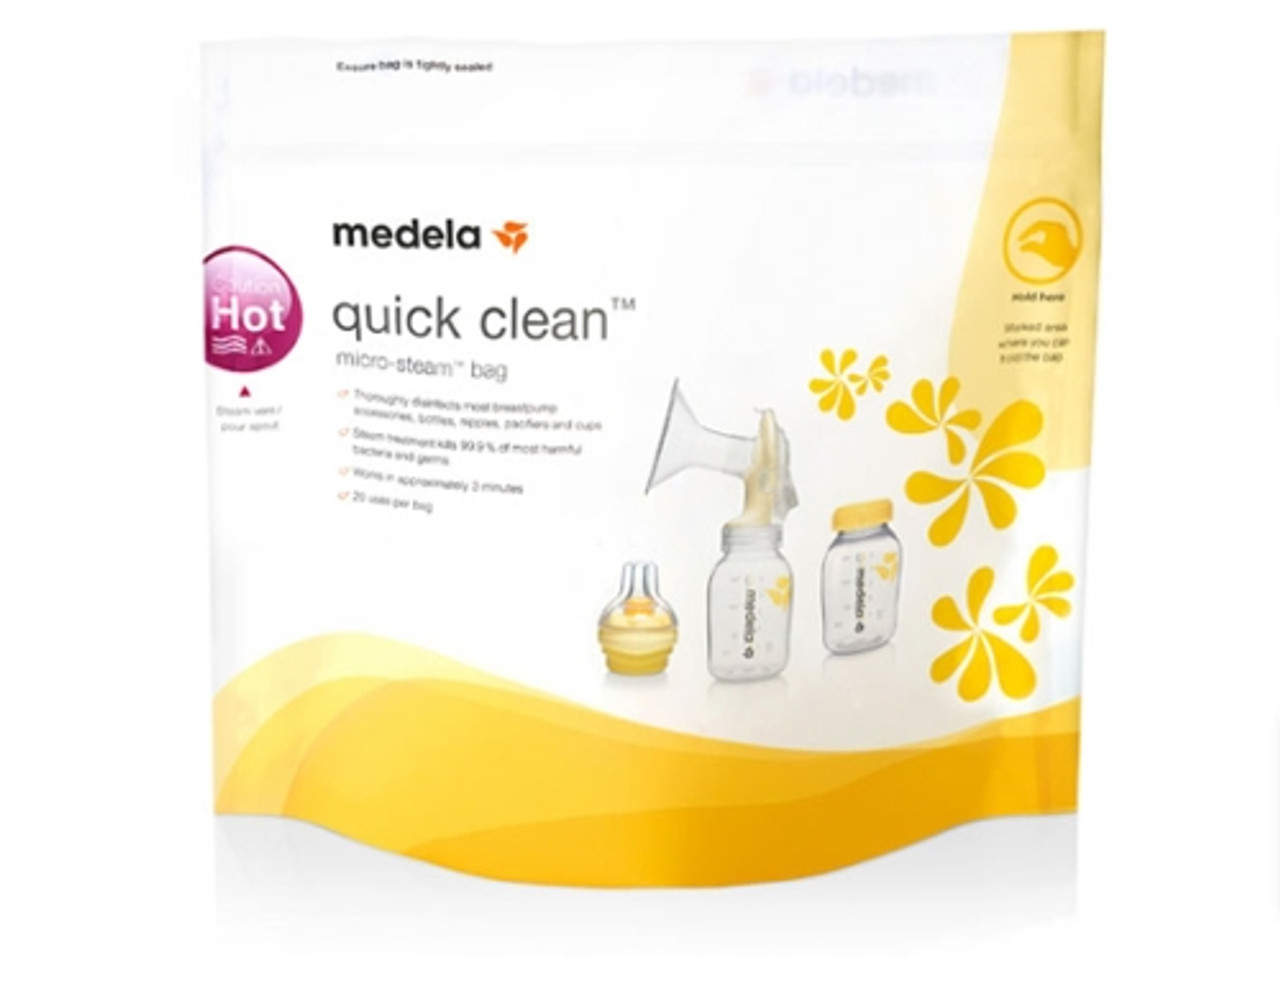 https://cdn11.bigcommerce.com/s-kactwz0nay/images/stencil/1280x1280/products/209/857/Medela_bags__53946.1657486190.jpg?c=1